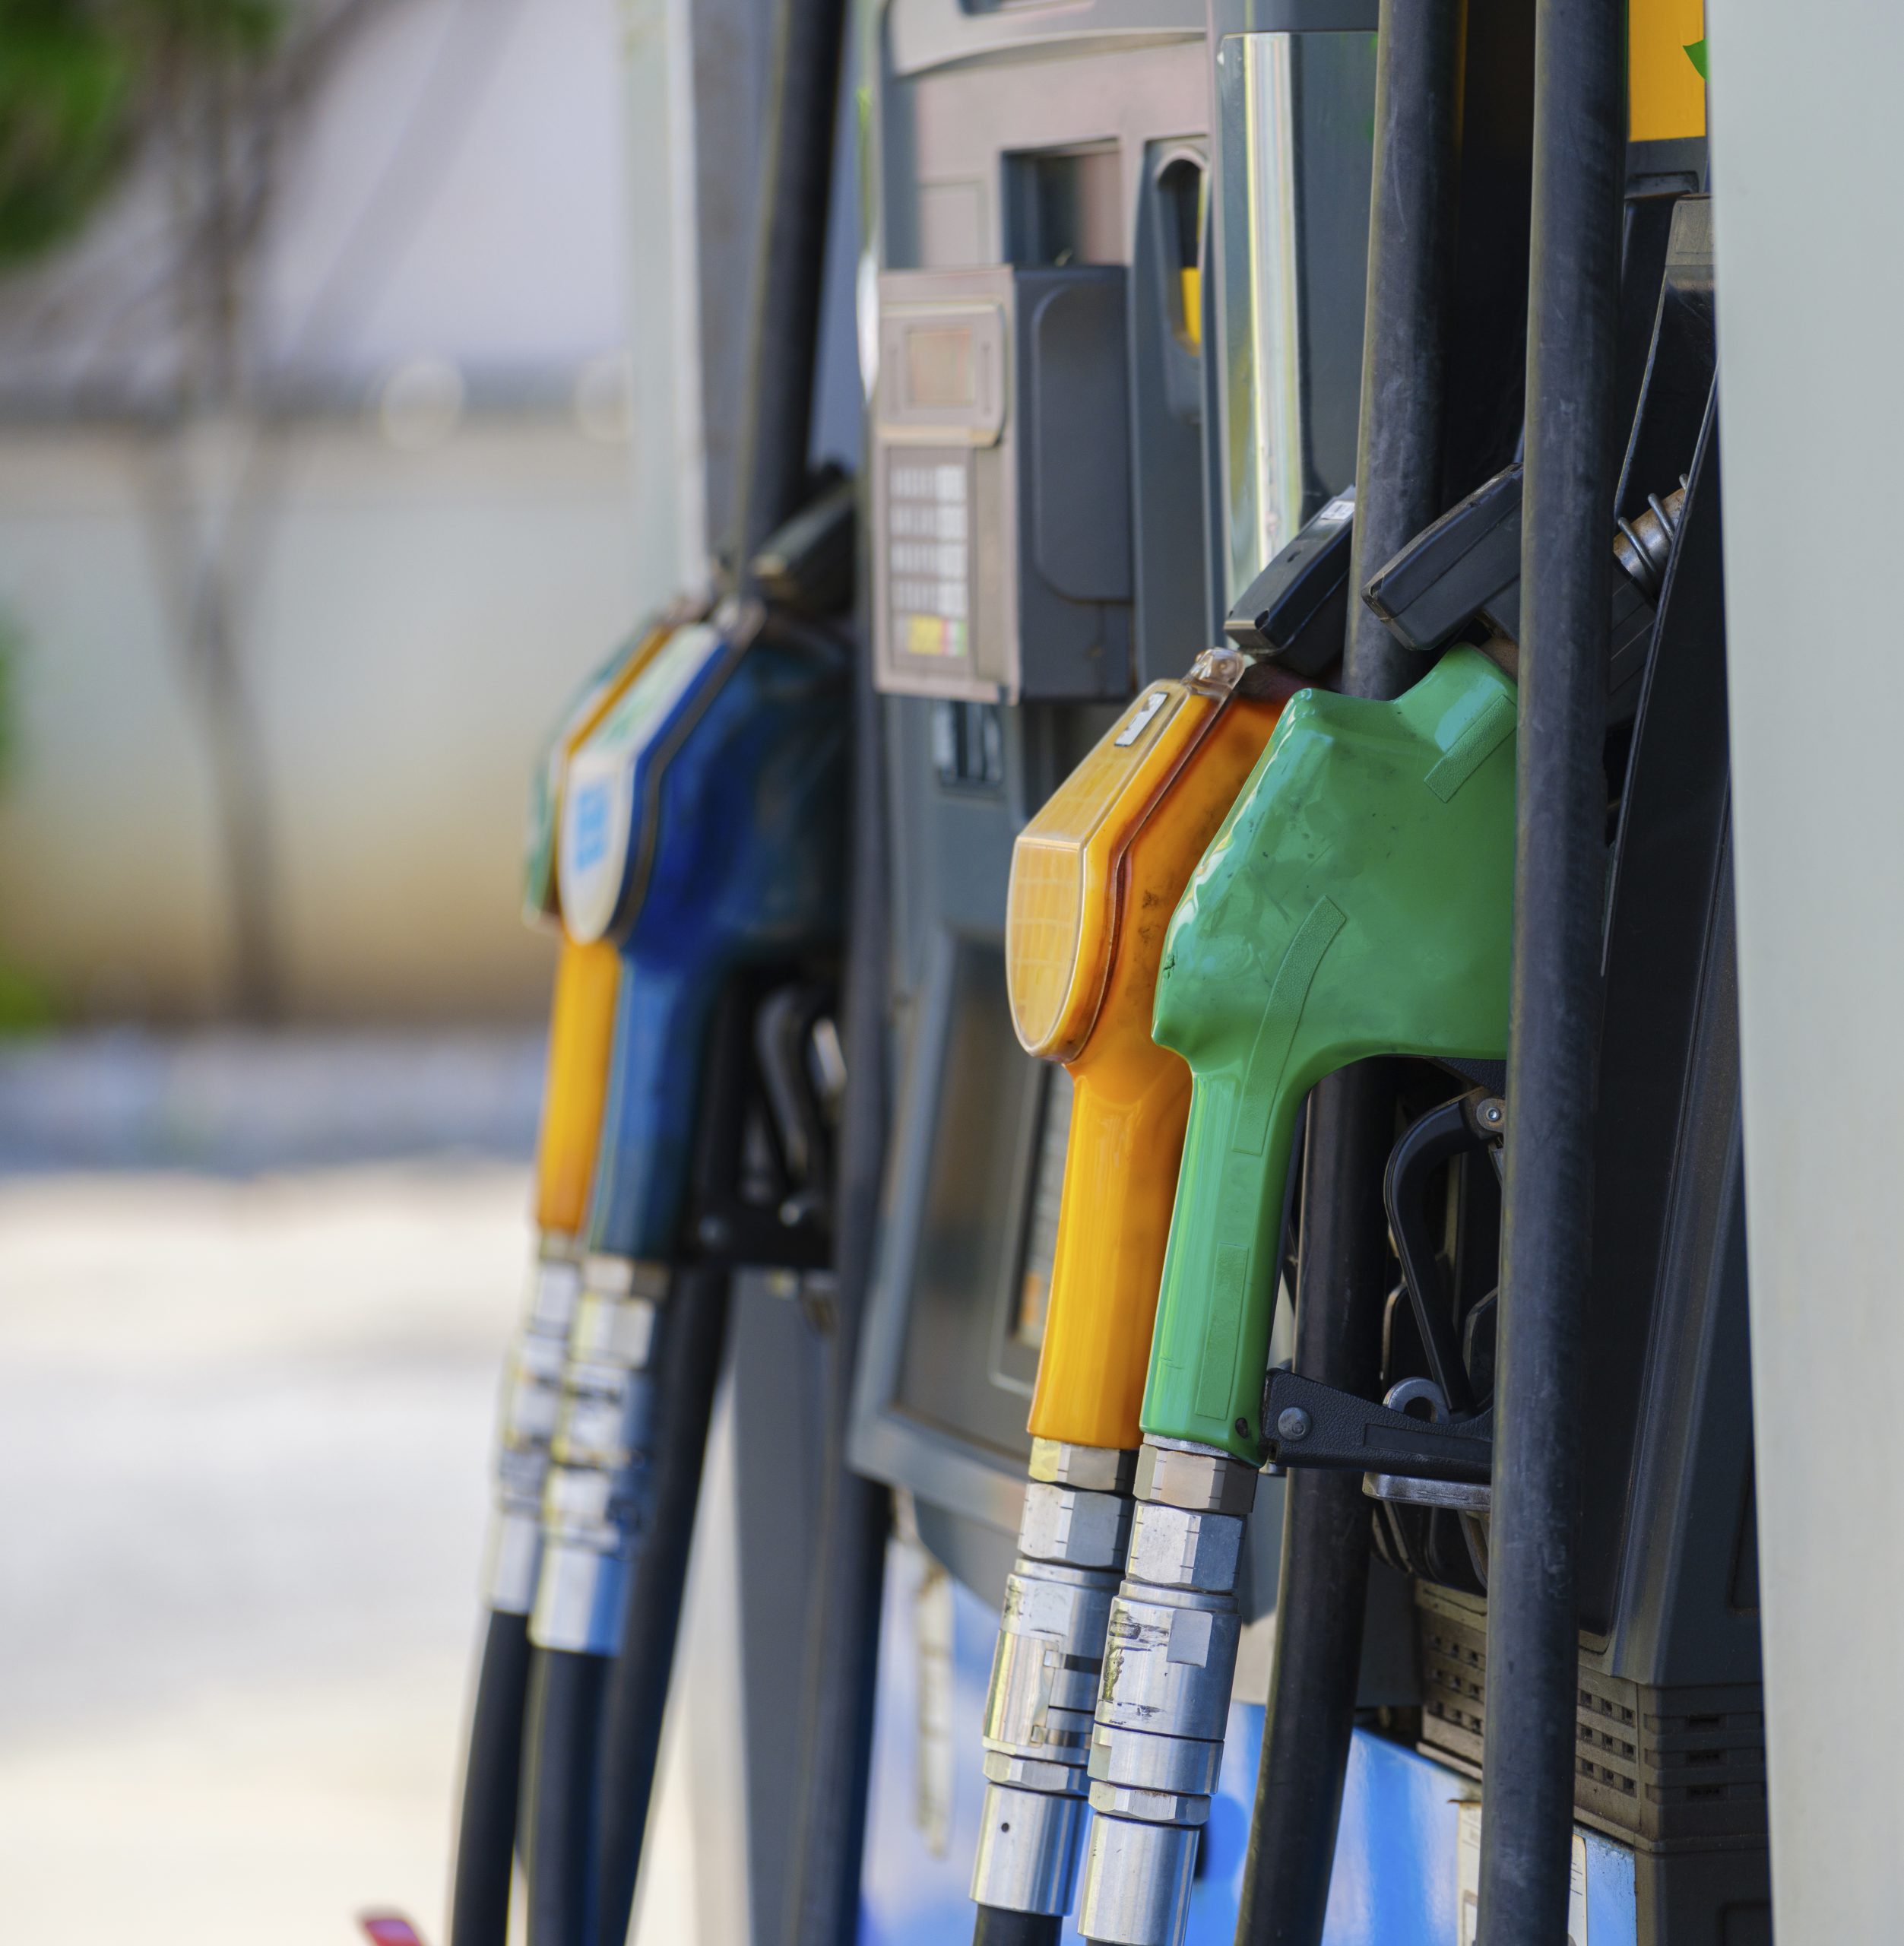 Gasoline pumps in close up photography